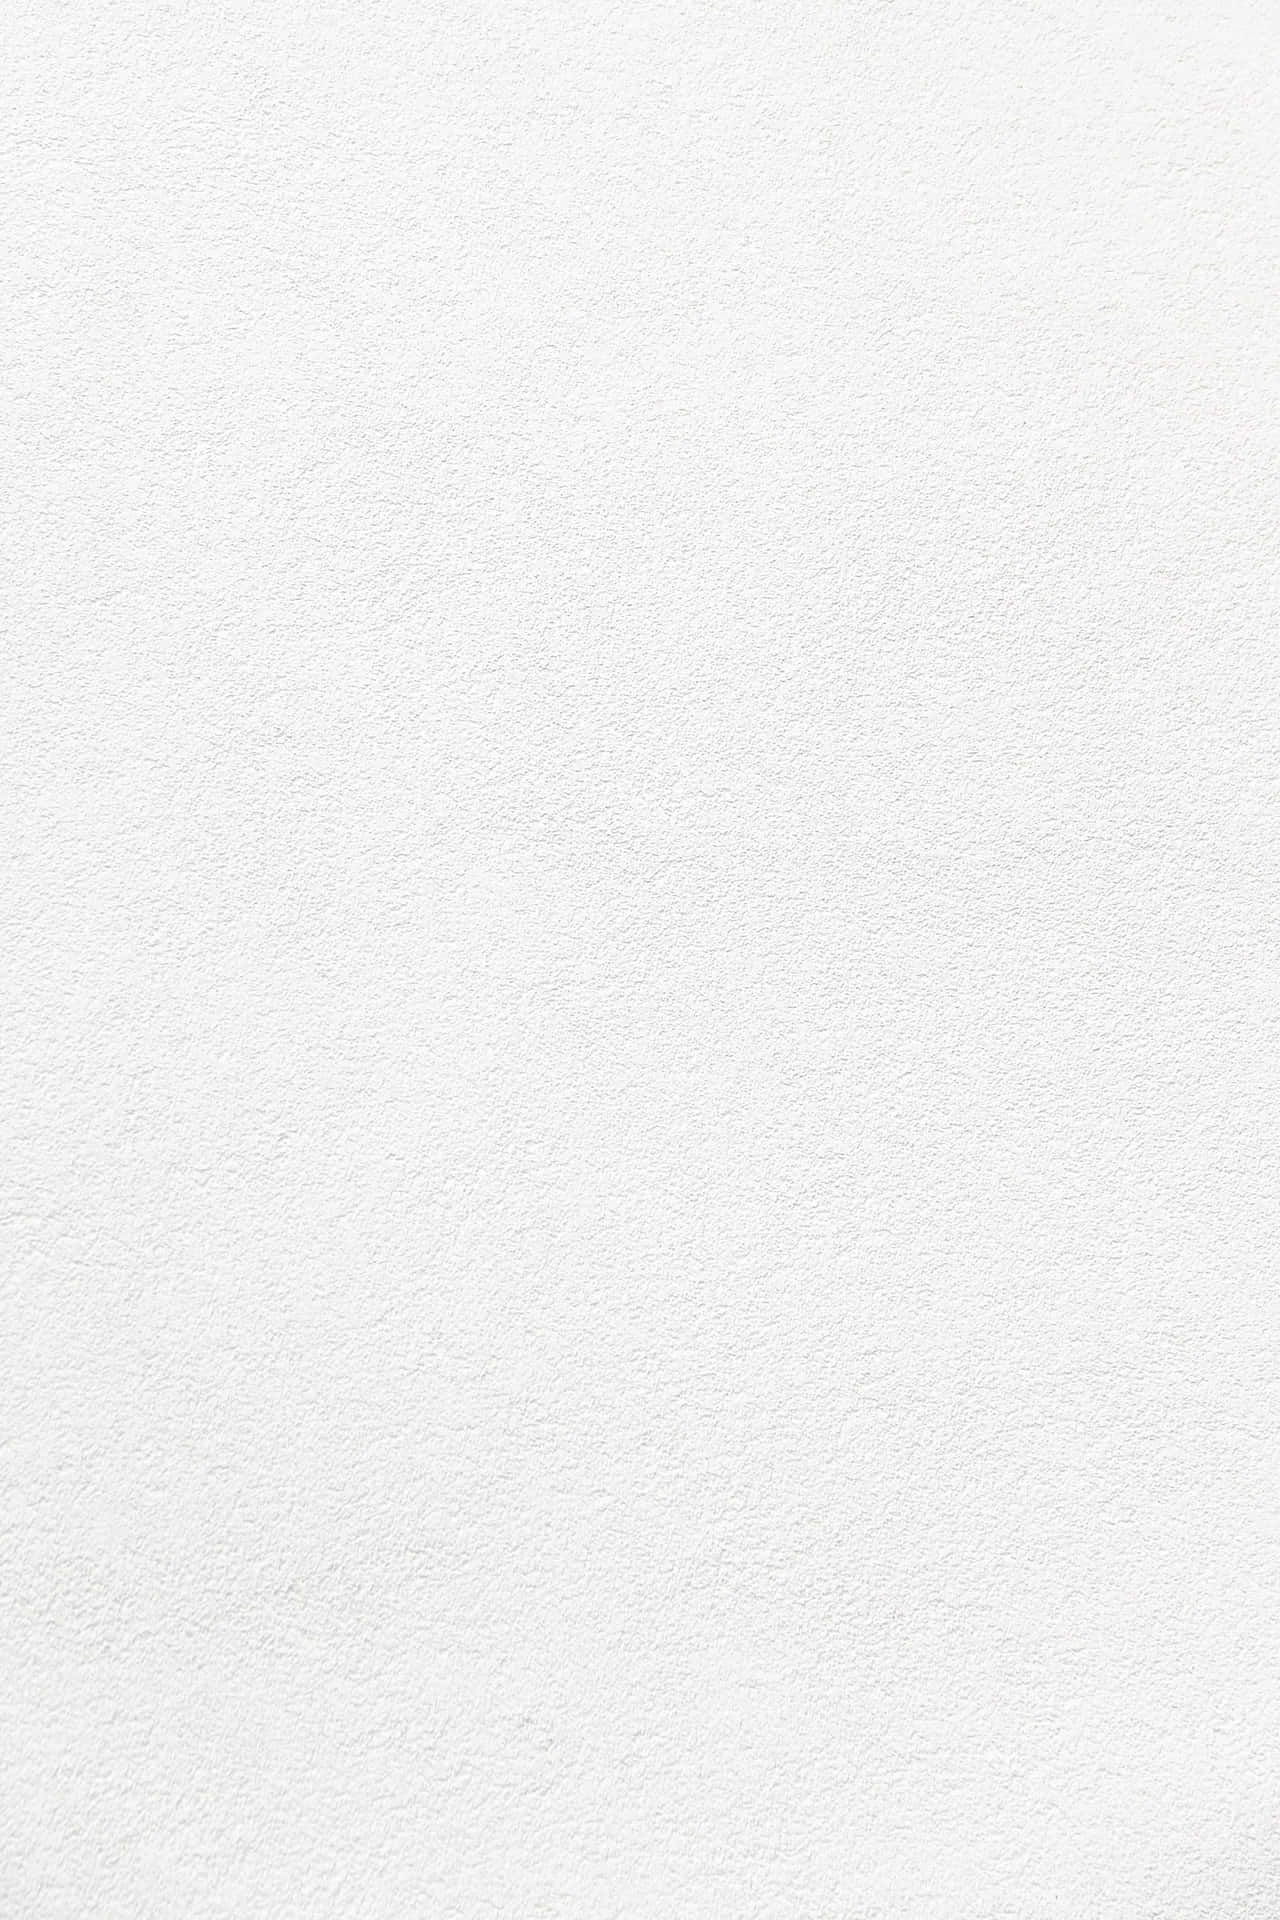 A White Background With A White Polka Dot